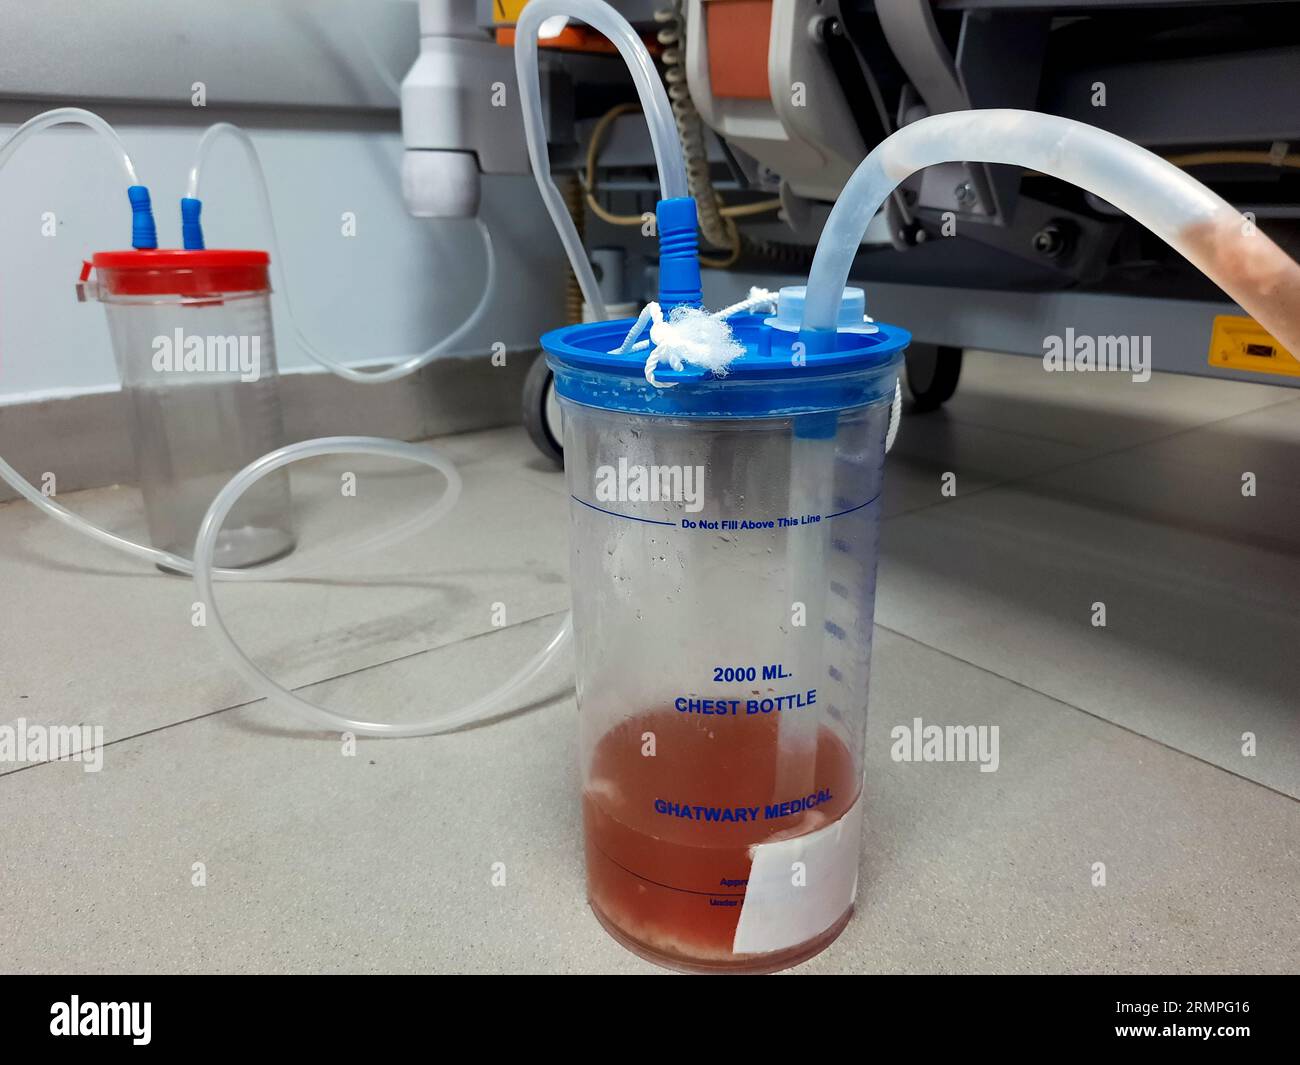 Cairo, Egypt, August 2 2023: Ghatwary medical chest bottle 2000ml, drainage from a chest tube of aspiration pneumonia case resulted in pleural effusio Stock Photo